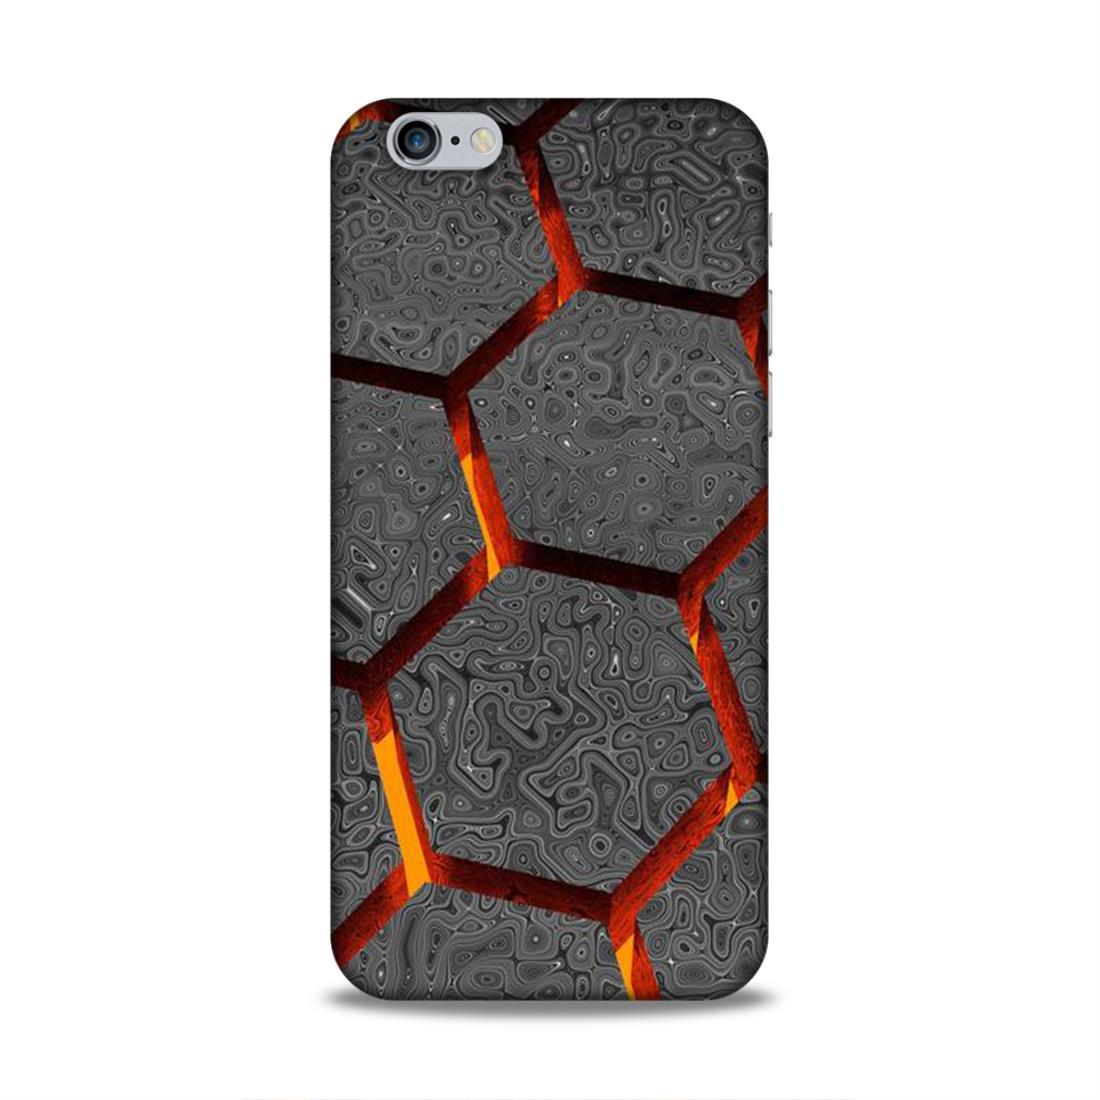 Hexagon Pattern iPhone 6 Phone Case Cover